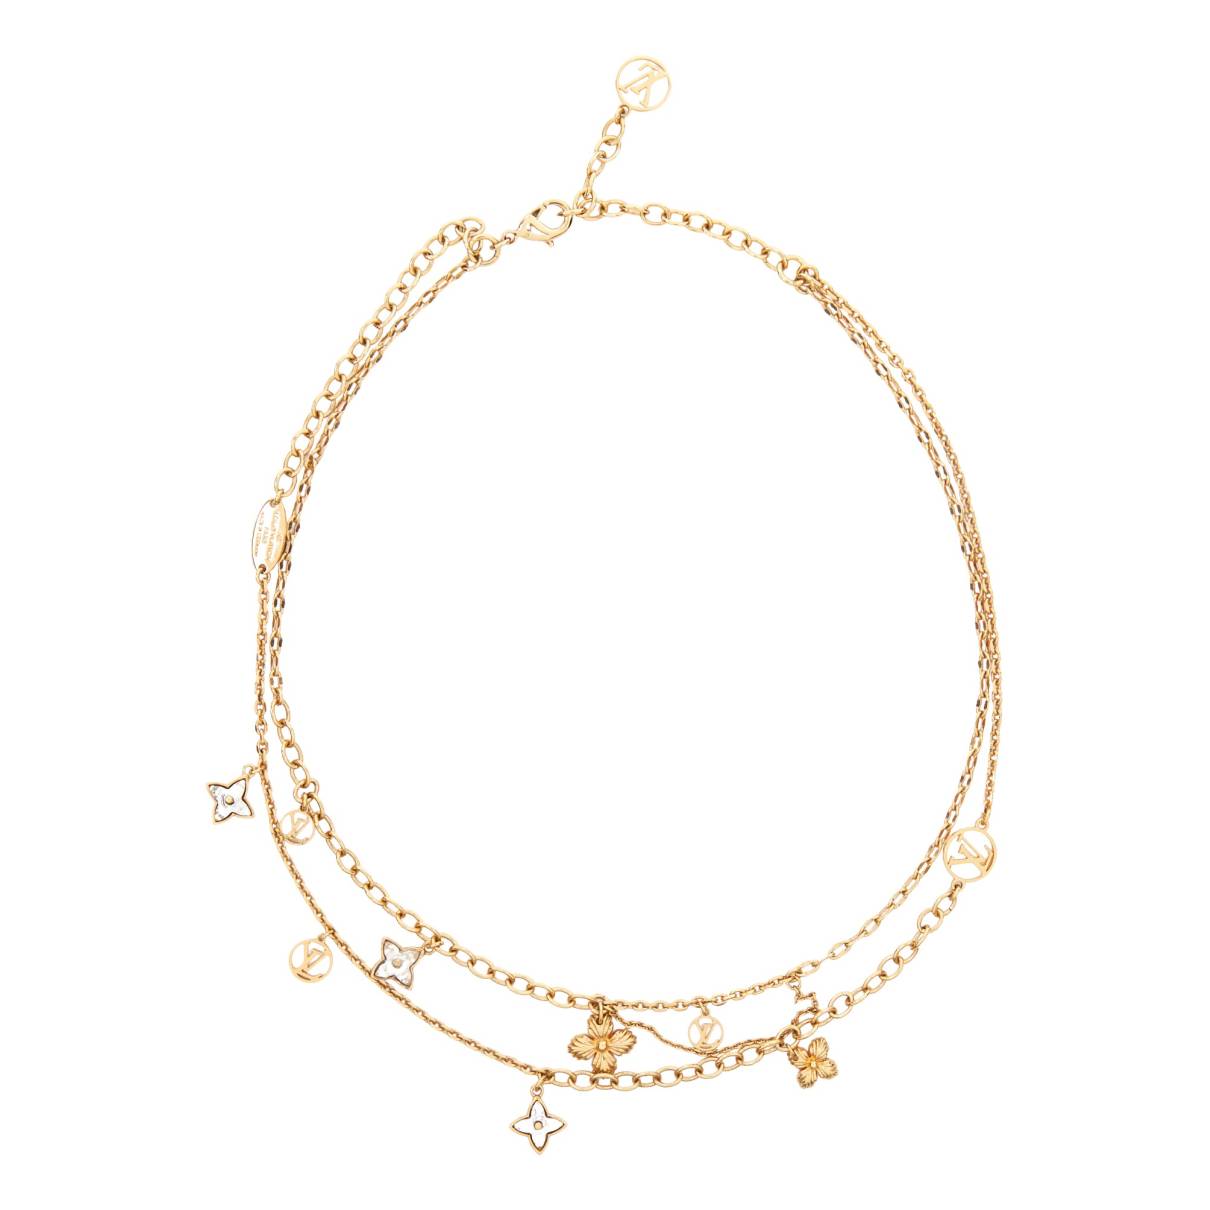 Louis Vuitton Blooming Strass Necklace, Gold